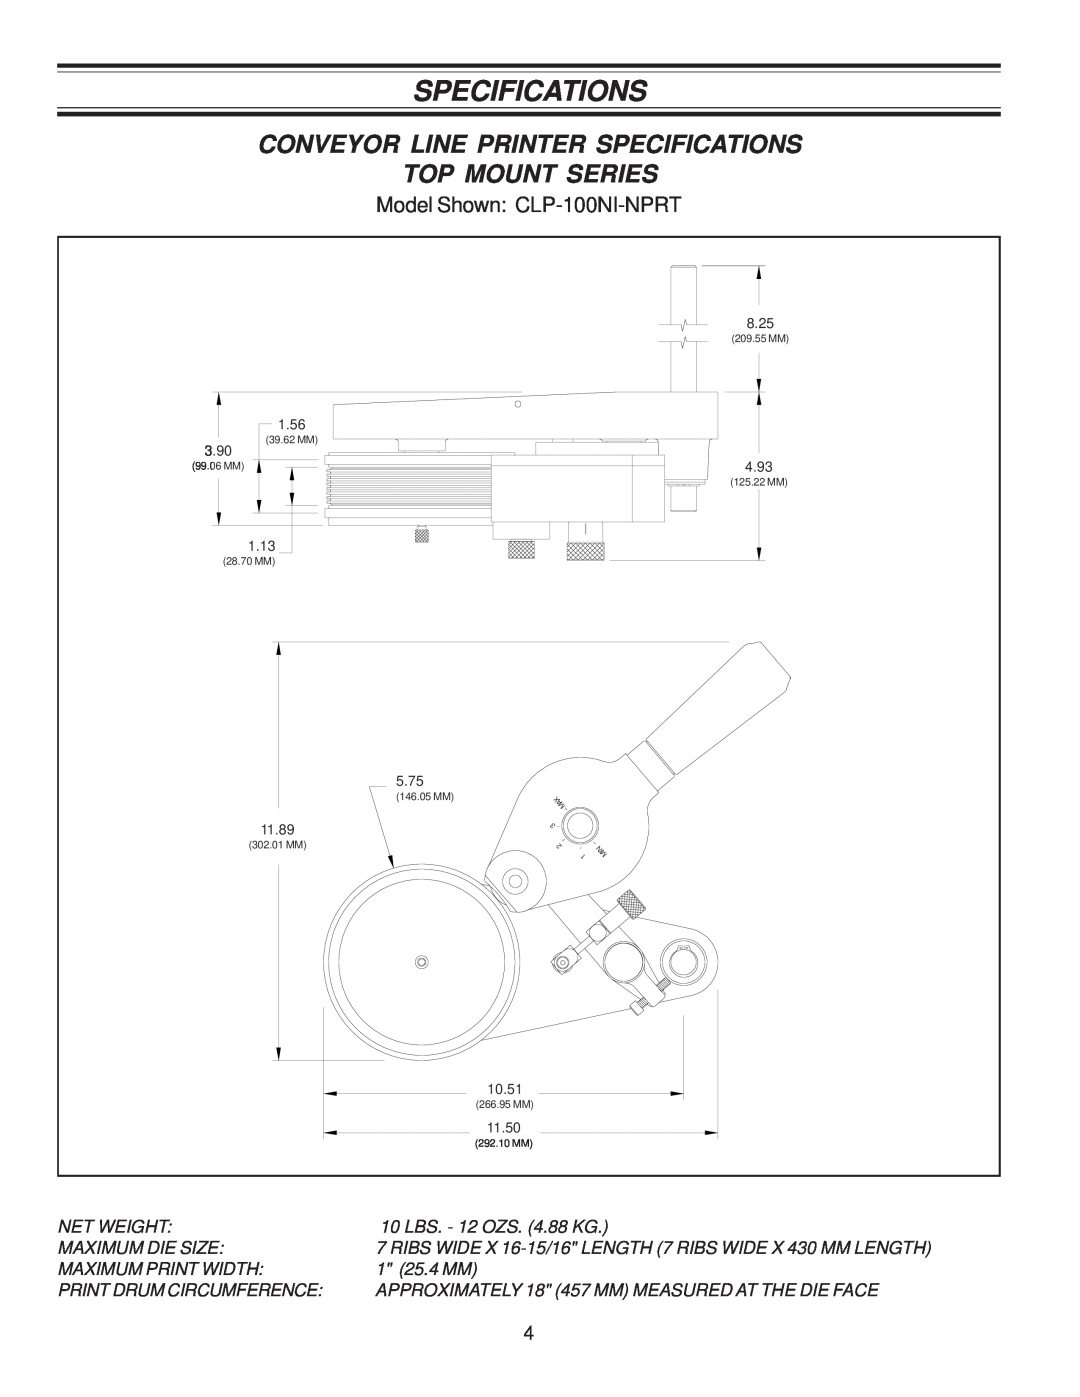 Universal Laser Systems CLP-100NI-NPRT manual Conveyor Line Printer Specifications Top Mount Series 